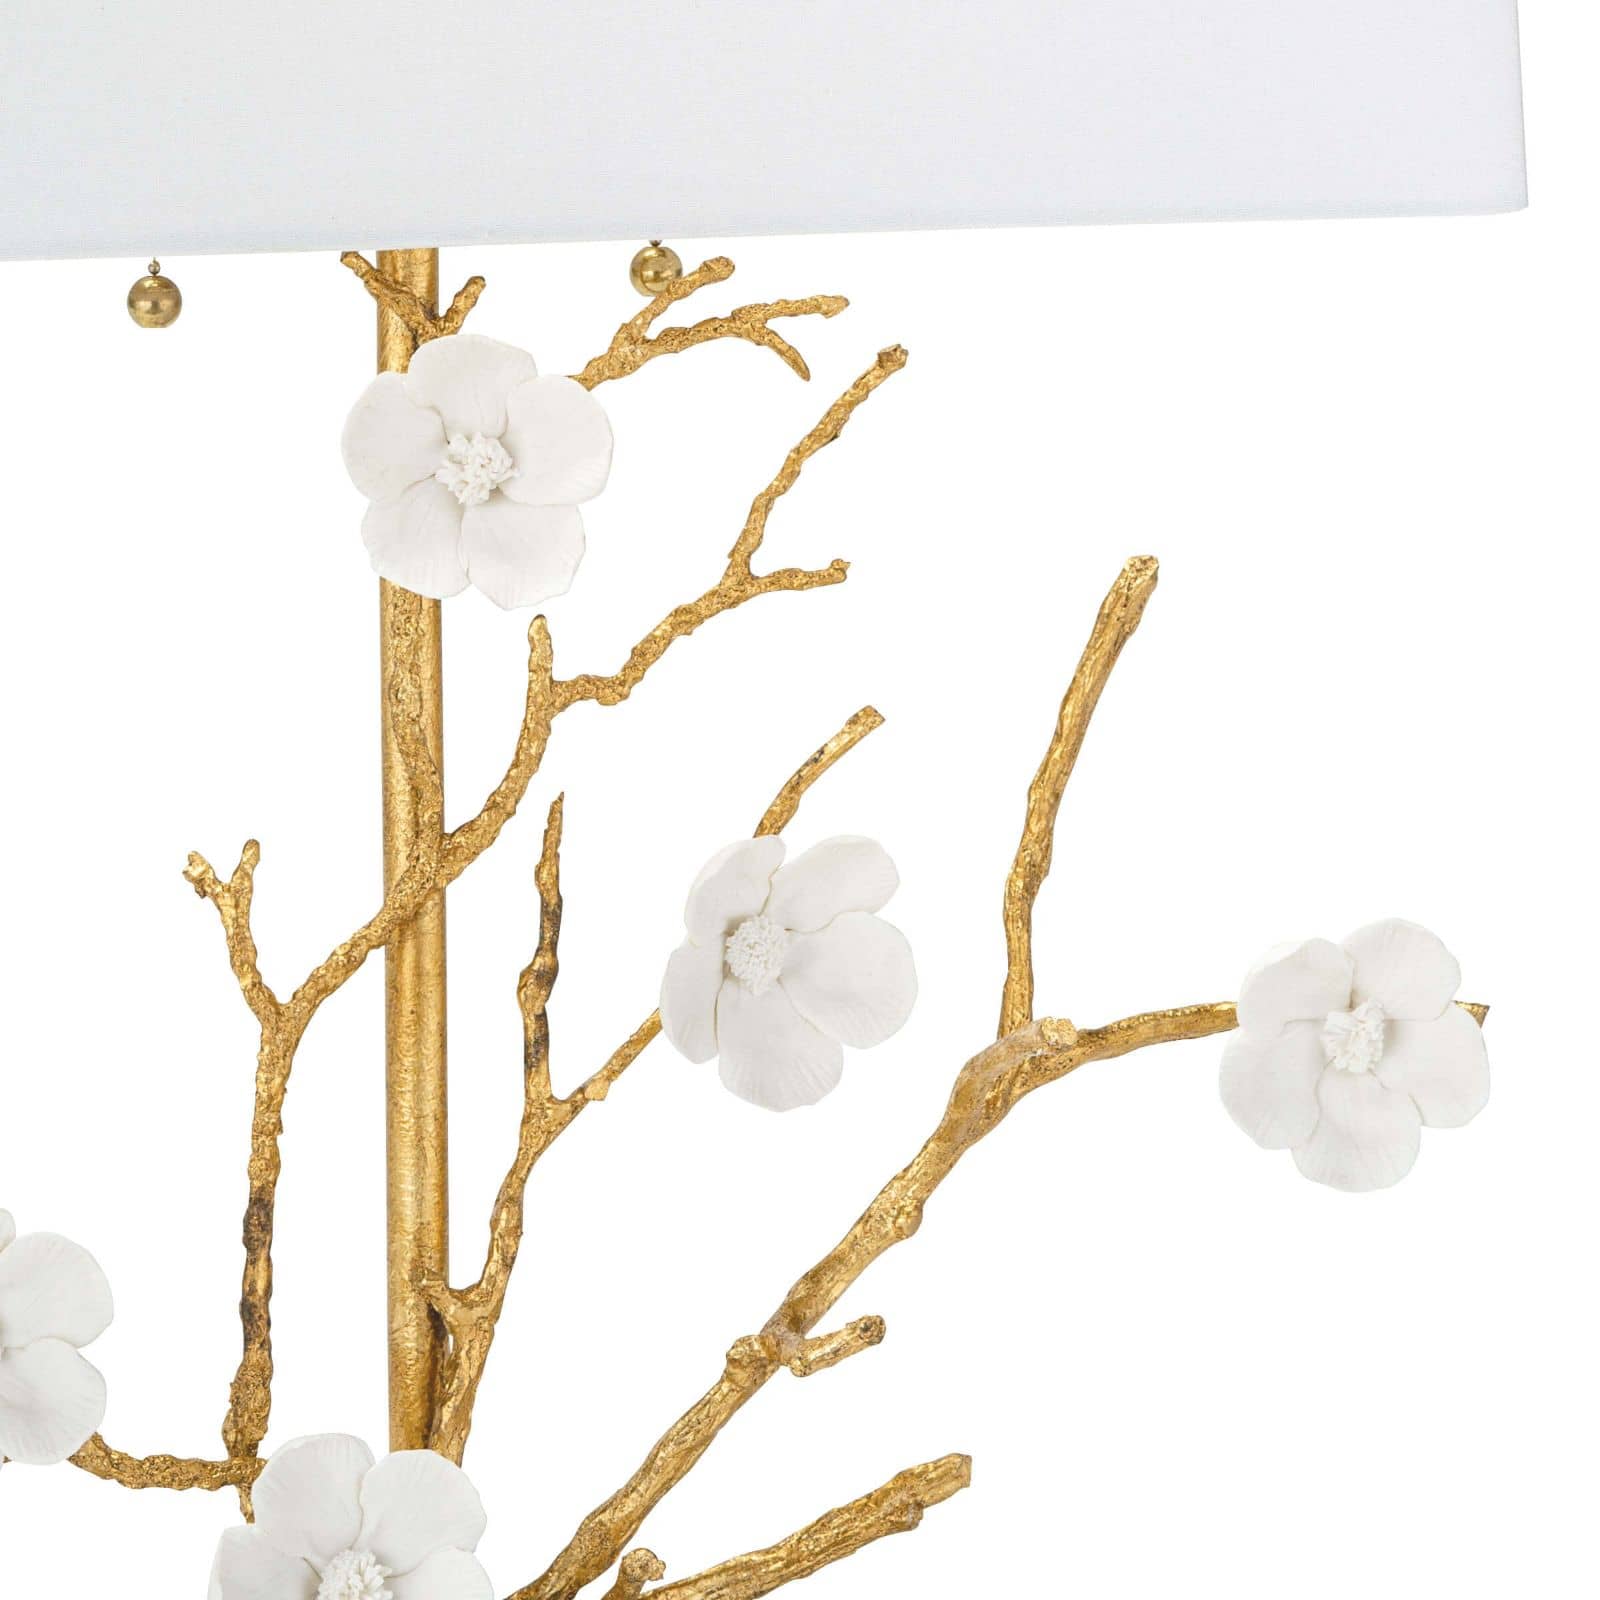 Cherise Horizontal Table Lamp in Gold by Regina Andrew